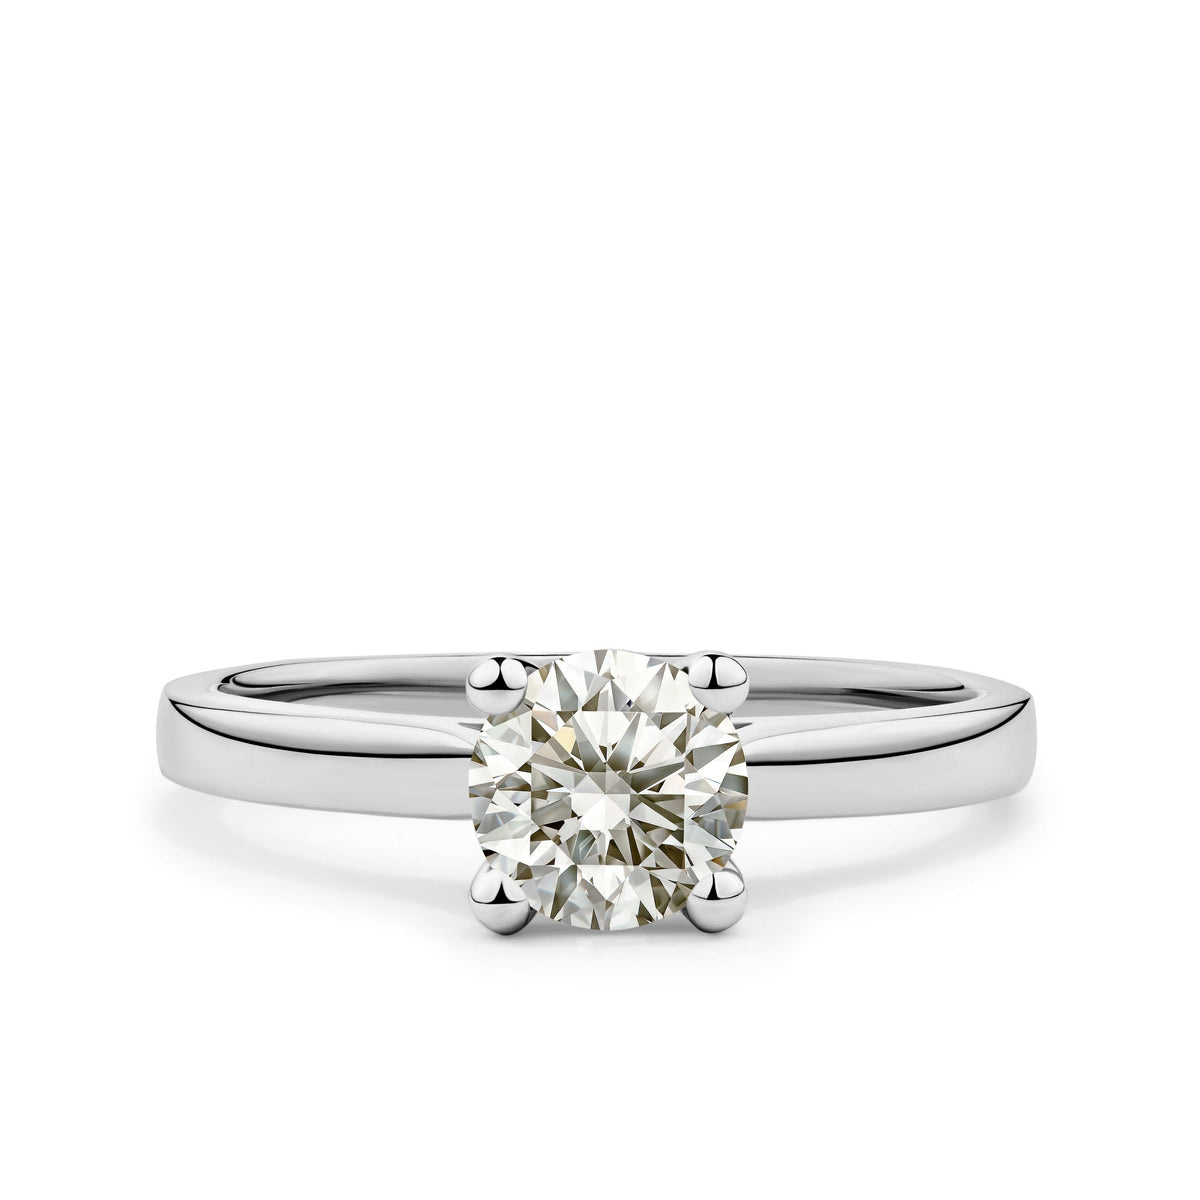 Rendition 1ct TW Diamond Solitaire Engagement Ring in 9ct White Gold - Wallace Bishop